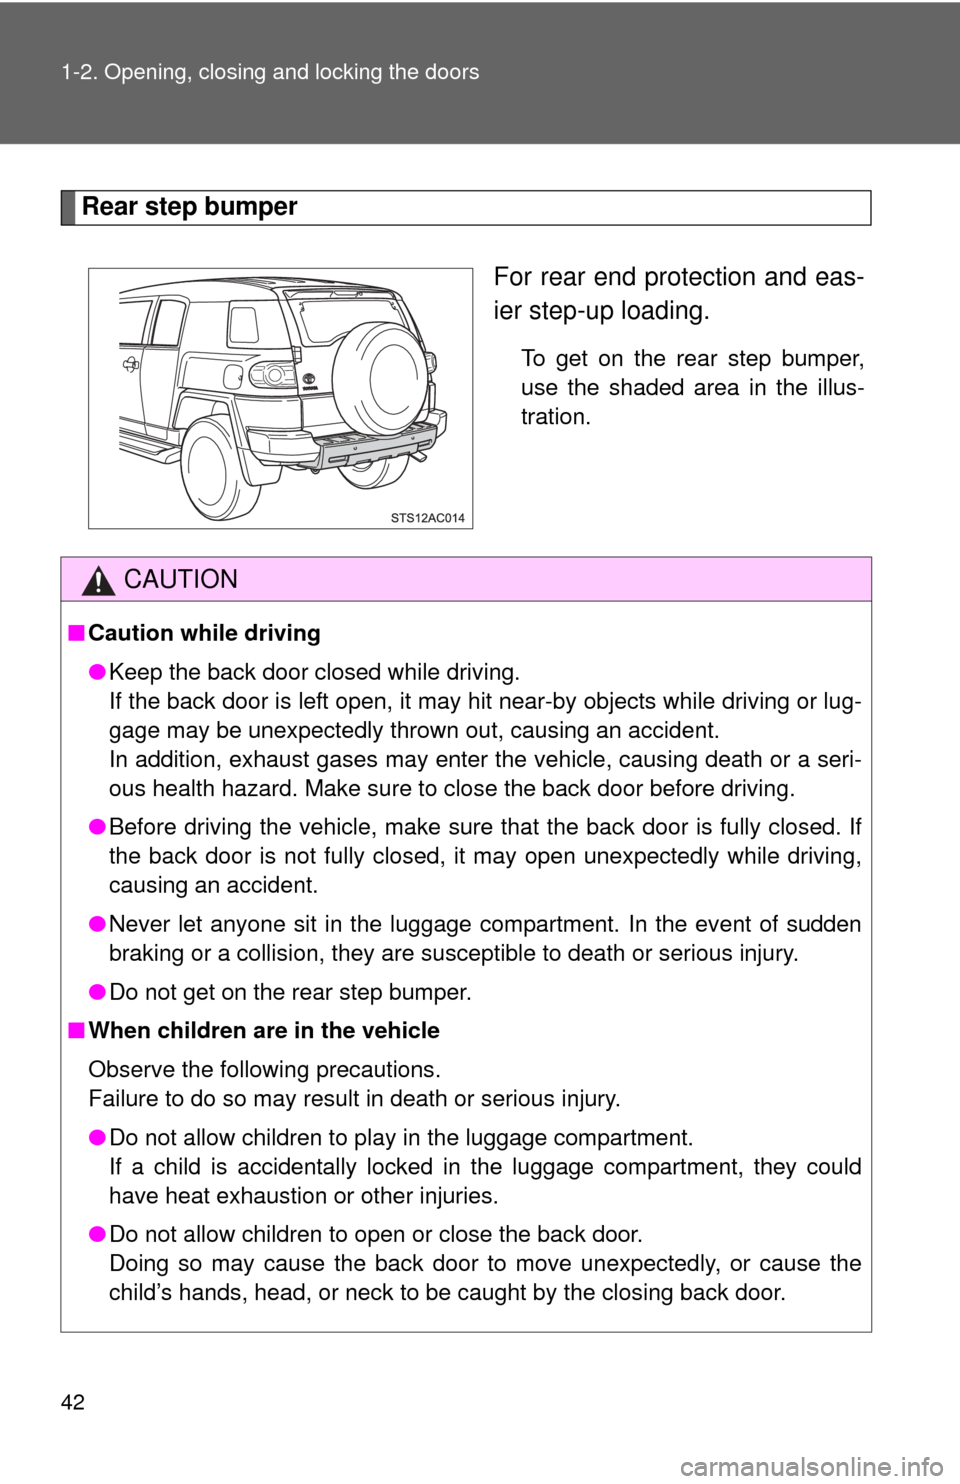 TOYOTA FJ CRUISER 2014 1.G Service Manual 42 1-2. Opening, closing and locking the doors
Rear step bumperFor rear end protection and eas-
ier step-up loading.
To get on the rear step bumper,
use the shaded area in the illus-
tration.
CAUTION
